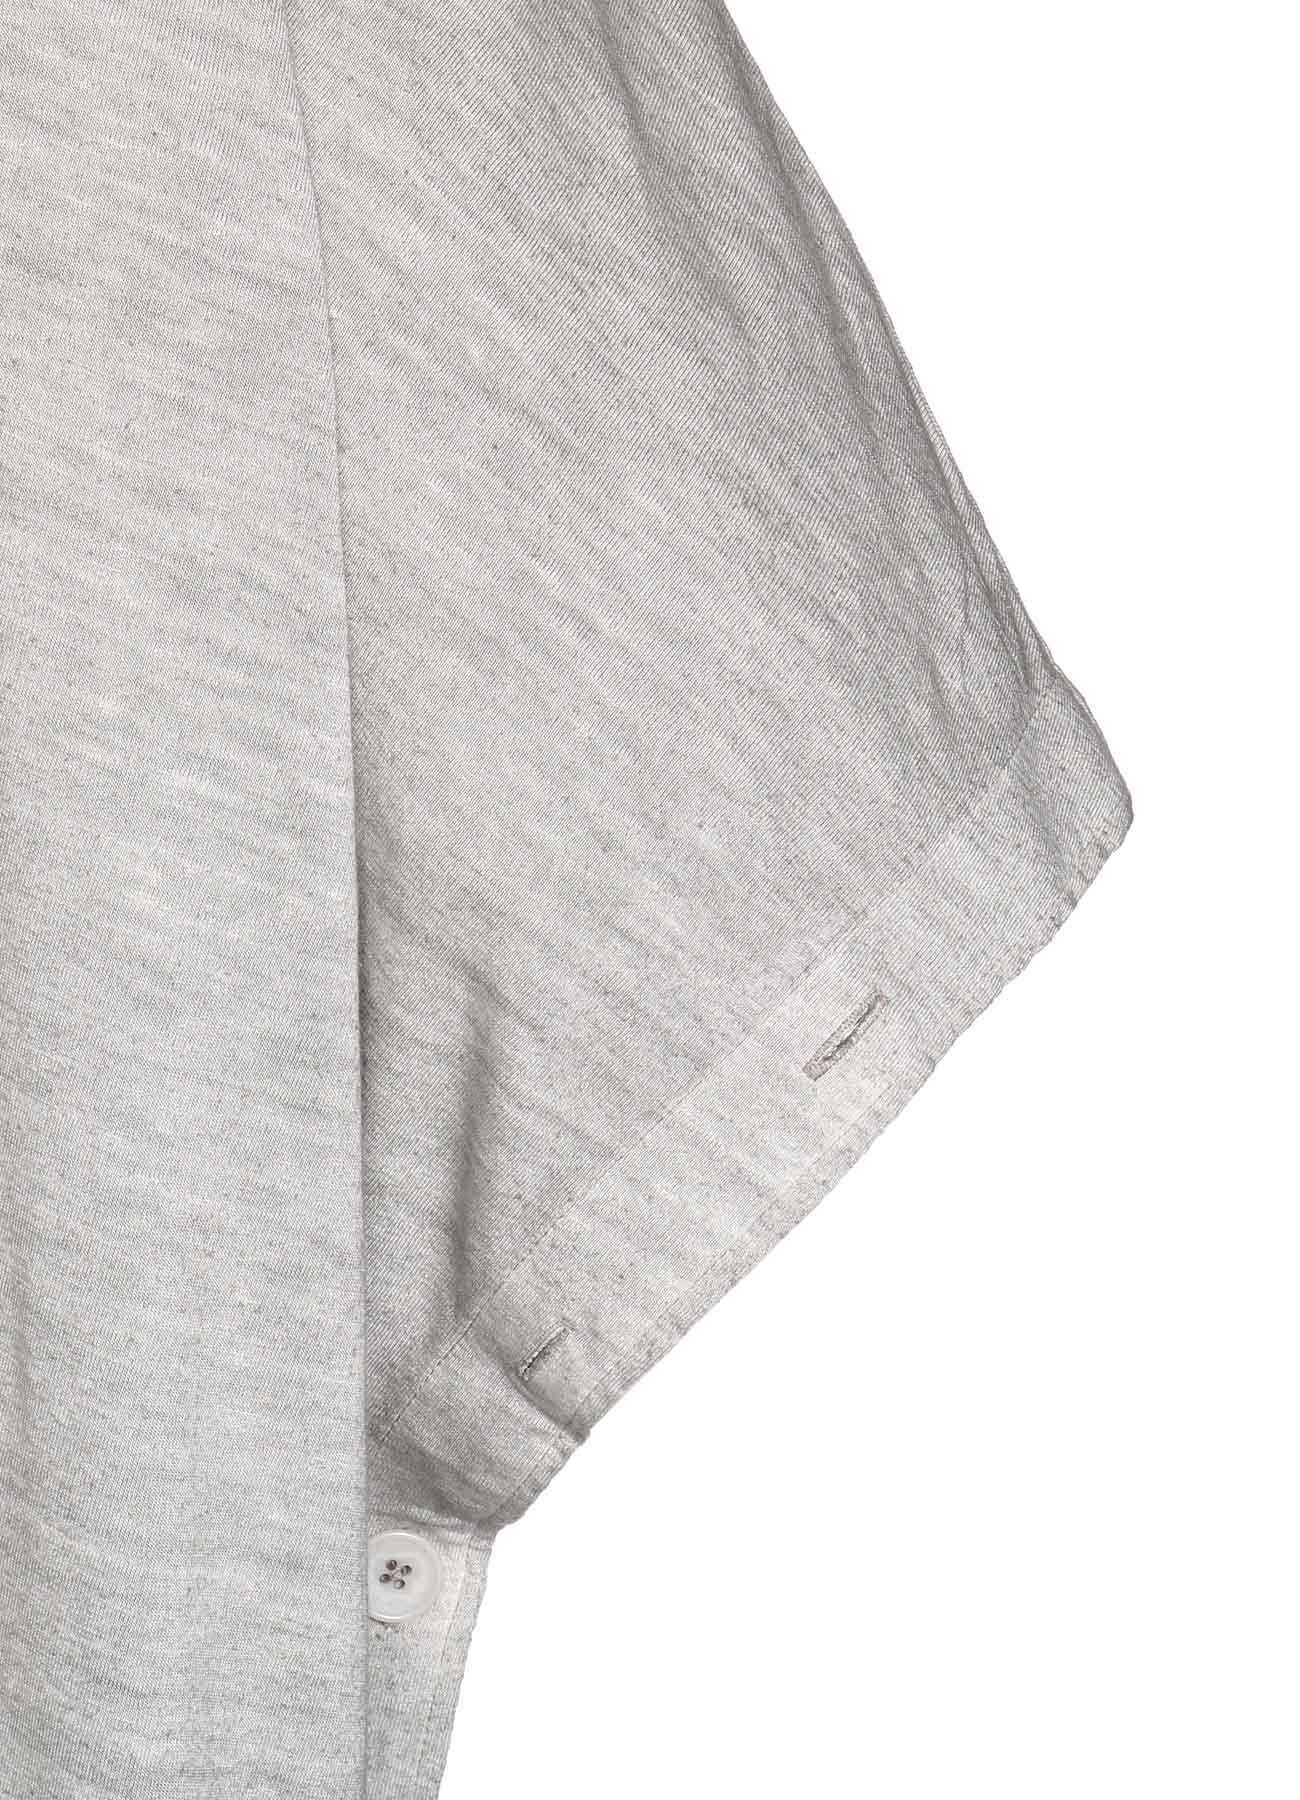 SUMI INK-DYED LINEN JERSEY SIDE BUTTON HALF SLEEVE BIG T-SHIRT